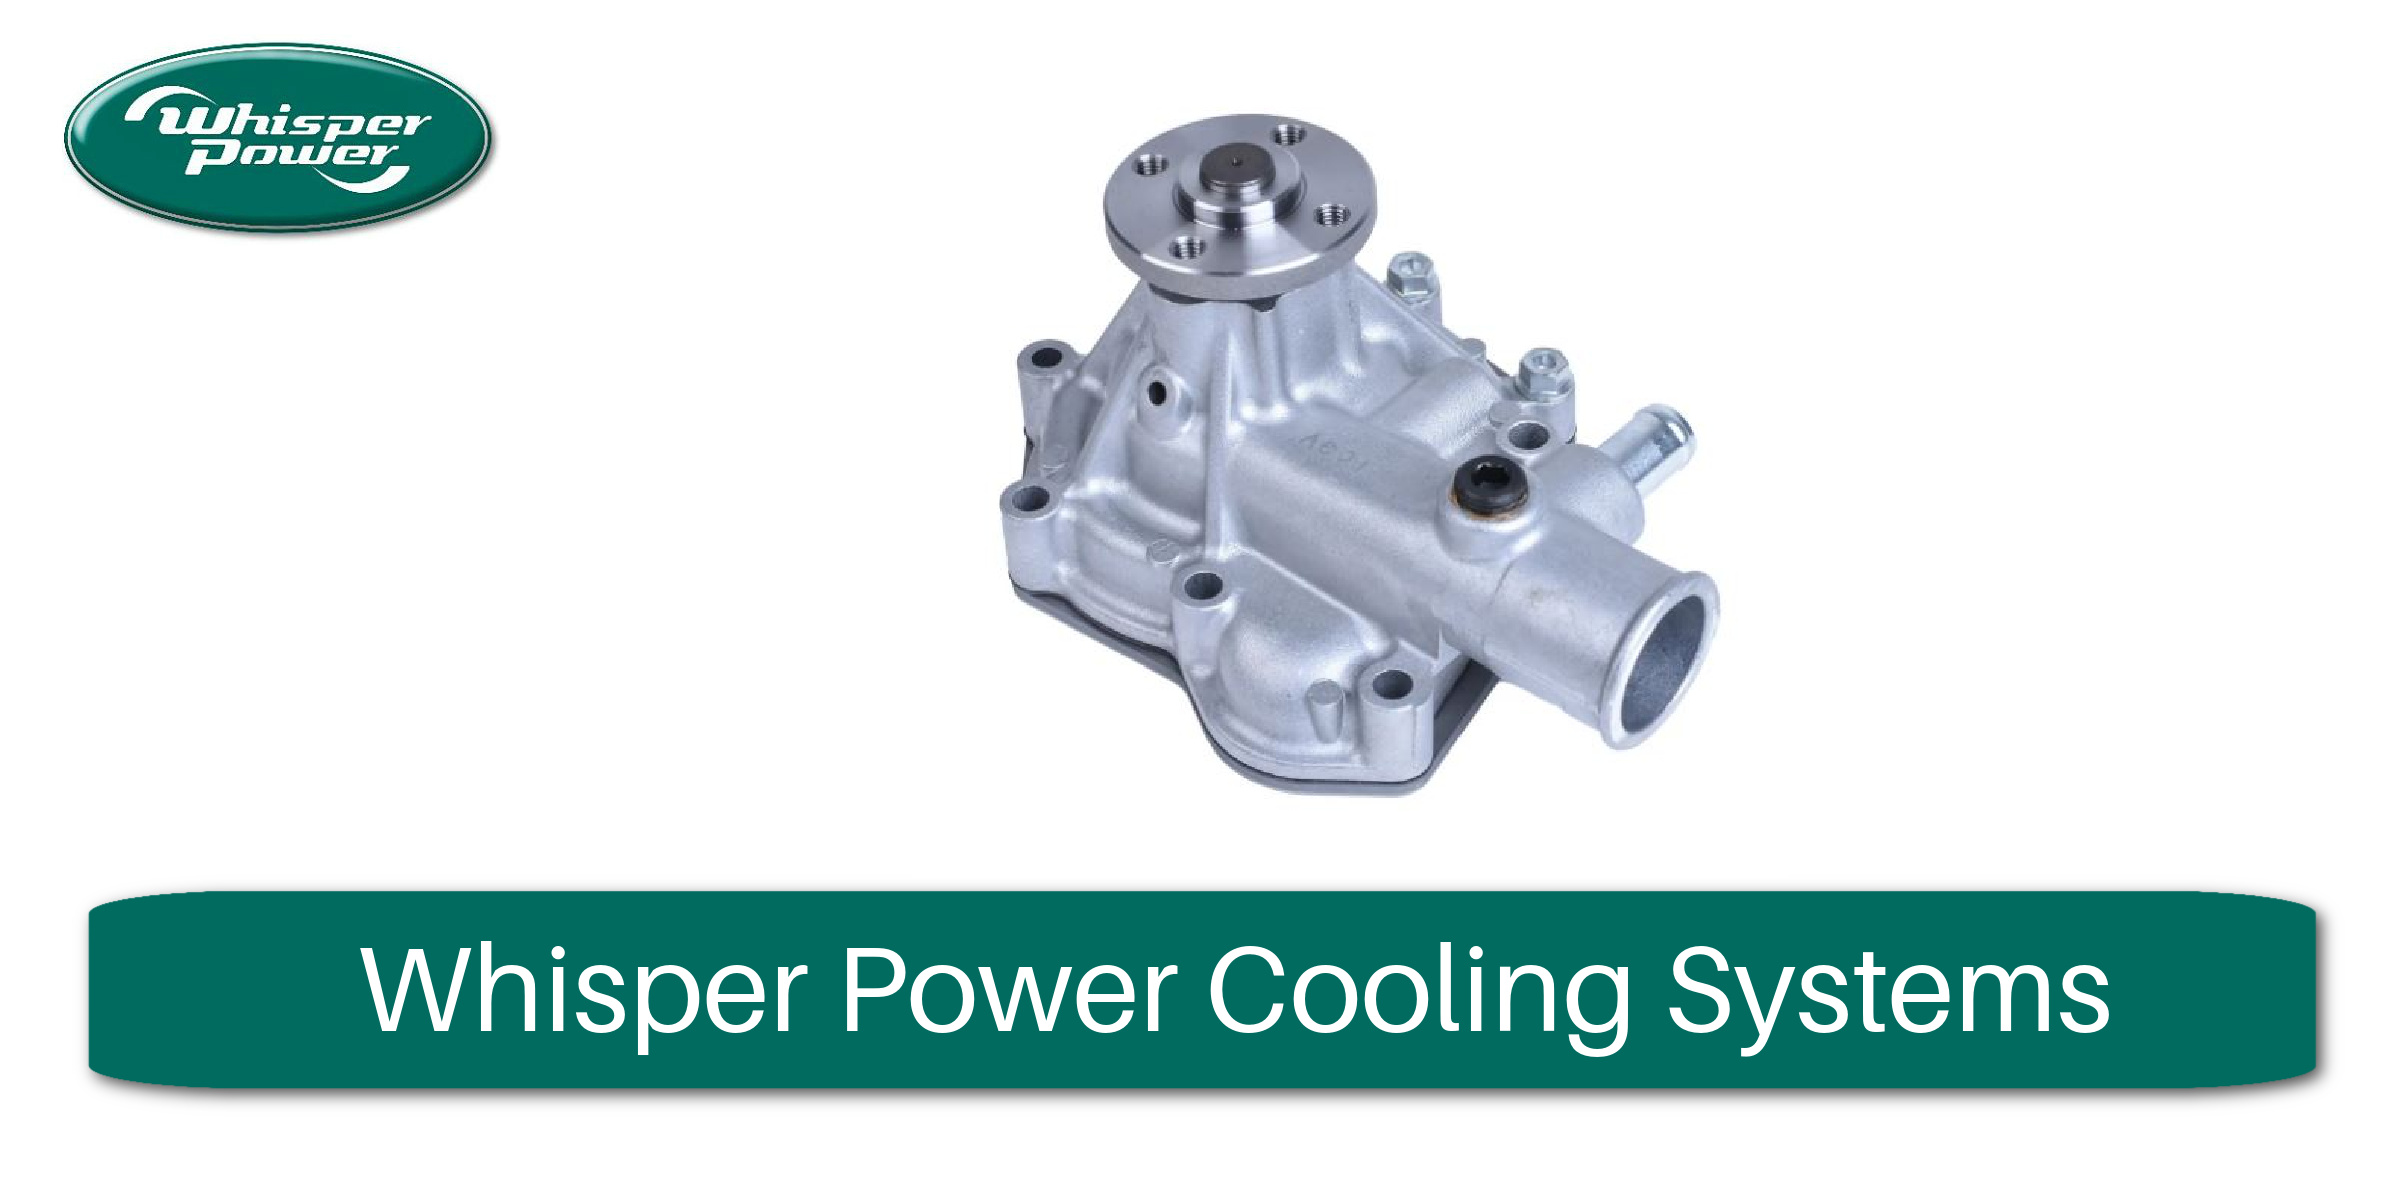 Whisper Power Cooling Systems